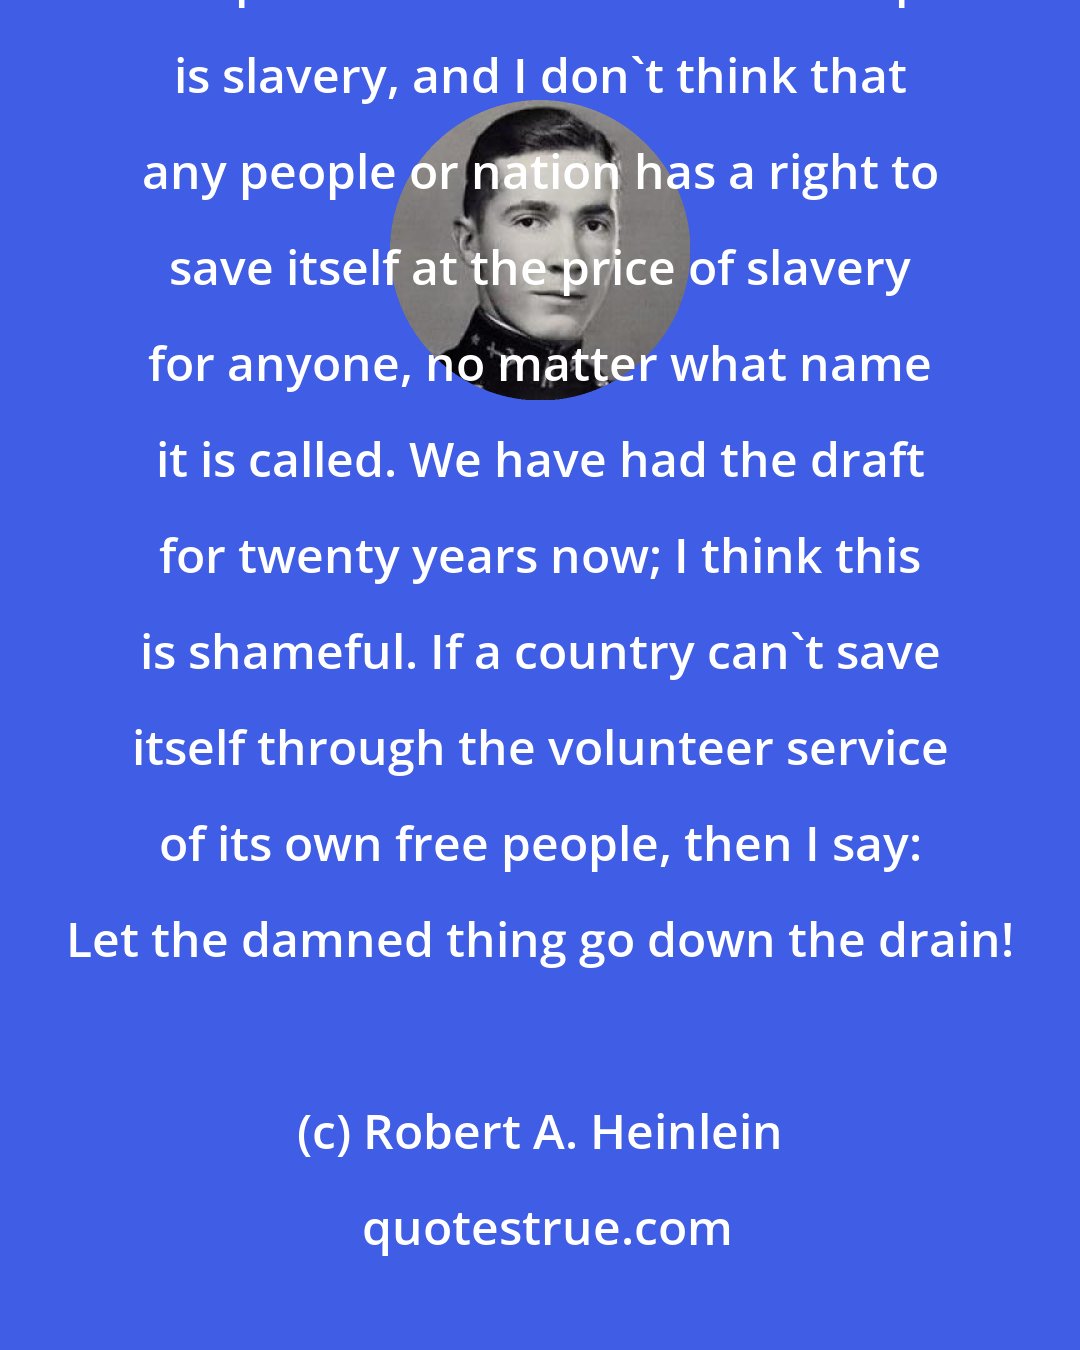 Robert A. Heinlein: I also think there are prices too high to pay to save the United States. Conscription is one of them. Conscription is slavery, and I don't think that any people or nation has a right to save itself at the price of slavery for anyone, no matter what name it is called. We have had the draft for twenty years now; I think this is shameful. If a country can't save itself through the volunteer service of its own free people, then I say: Let the damned thing go down the drain!